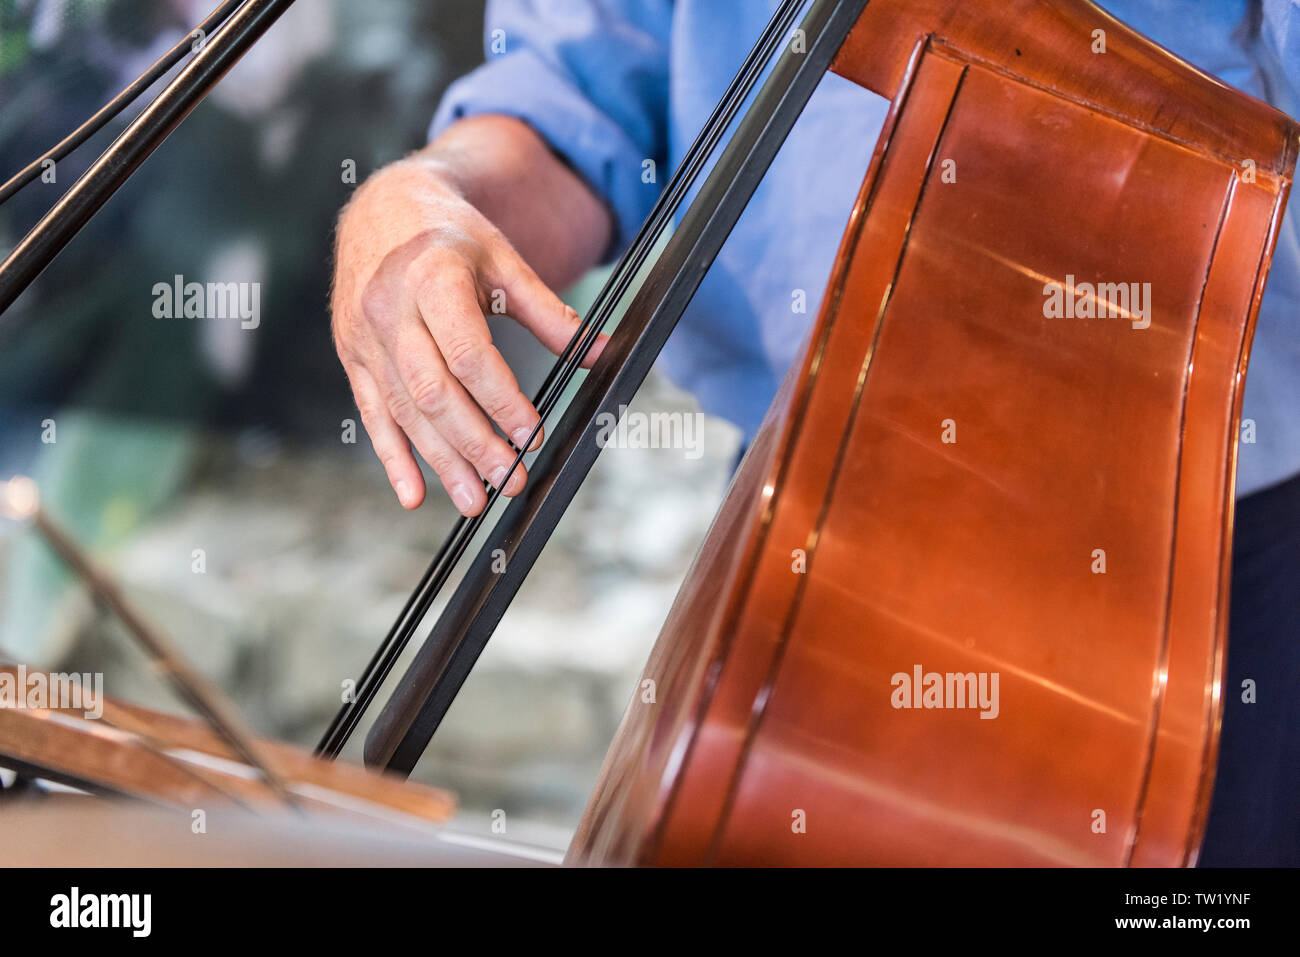 A musician playing a double bass. Stock Photo